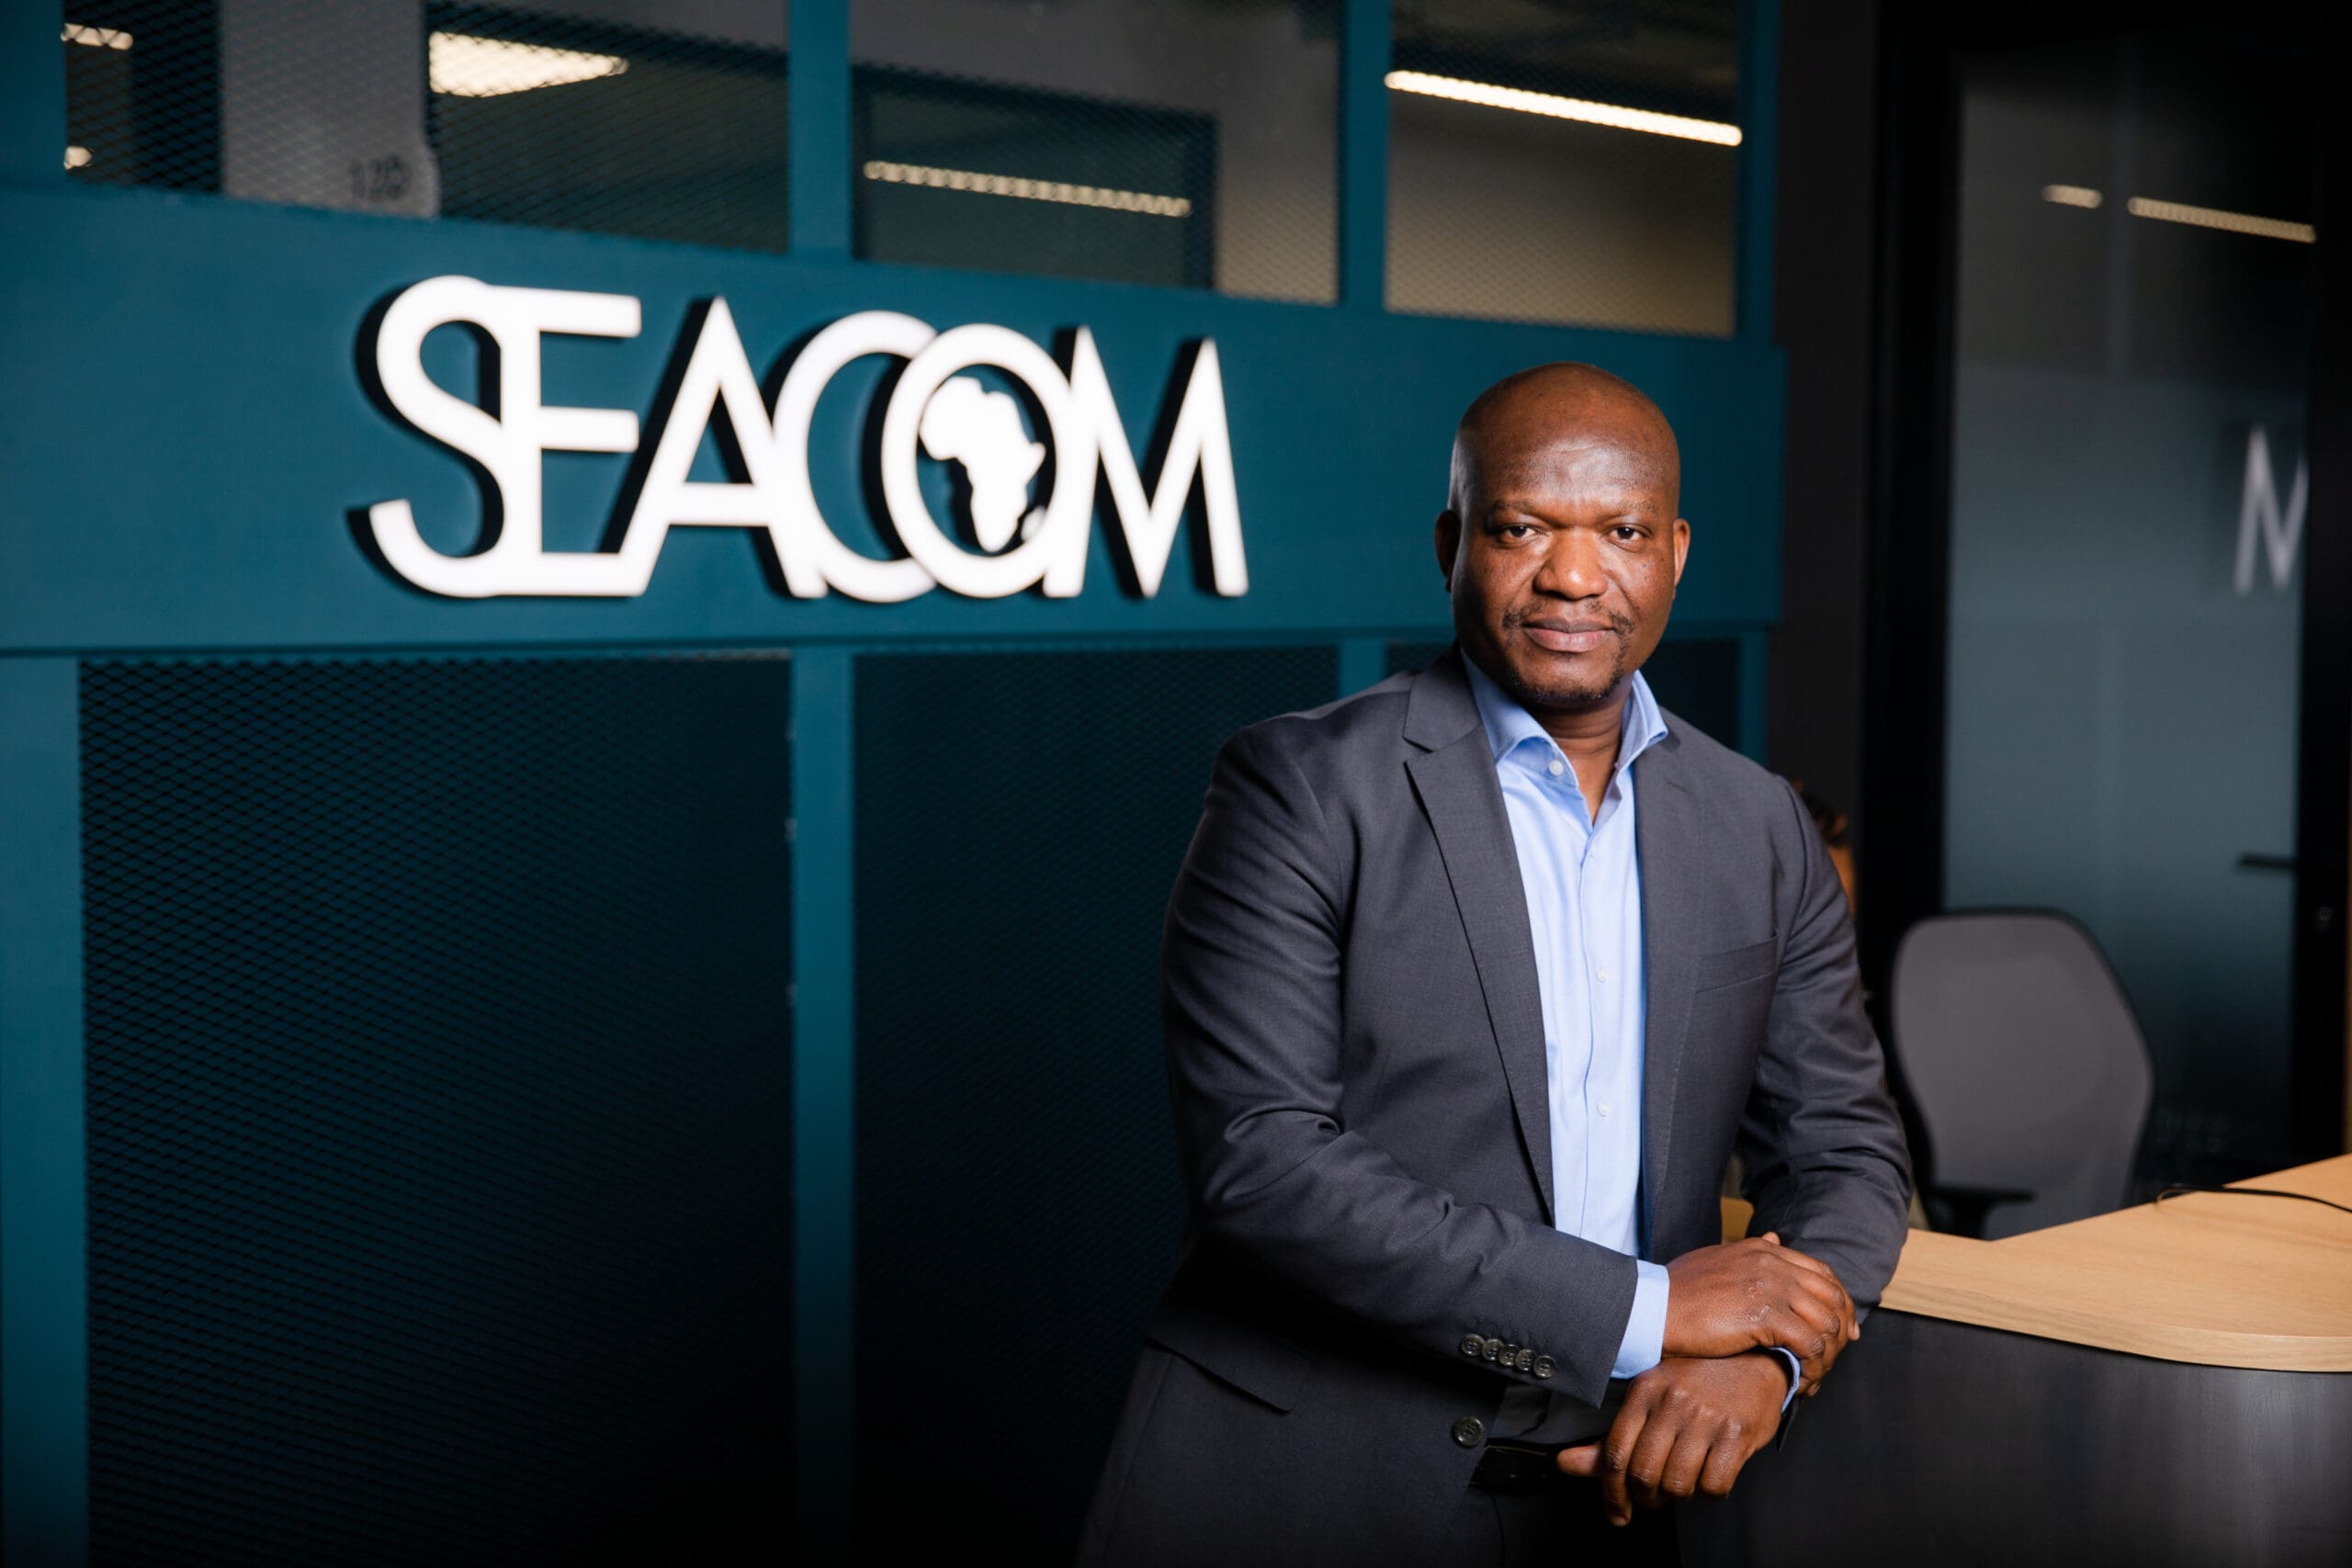 SEACOM Celebrates 15 Years Of Connected Futures